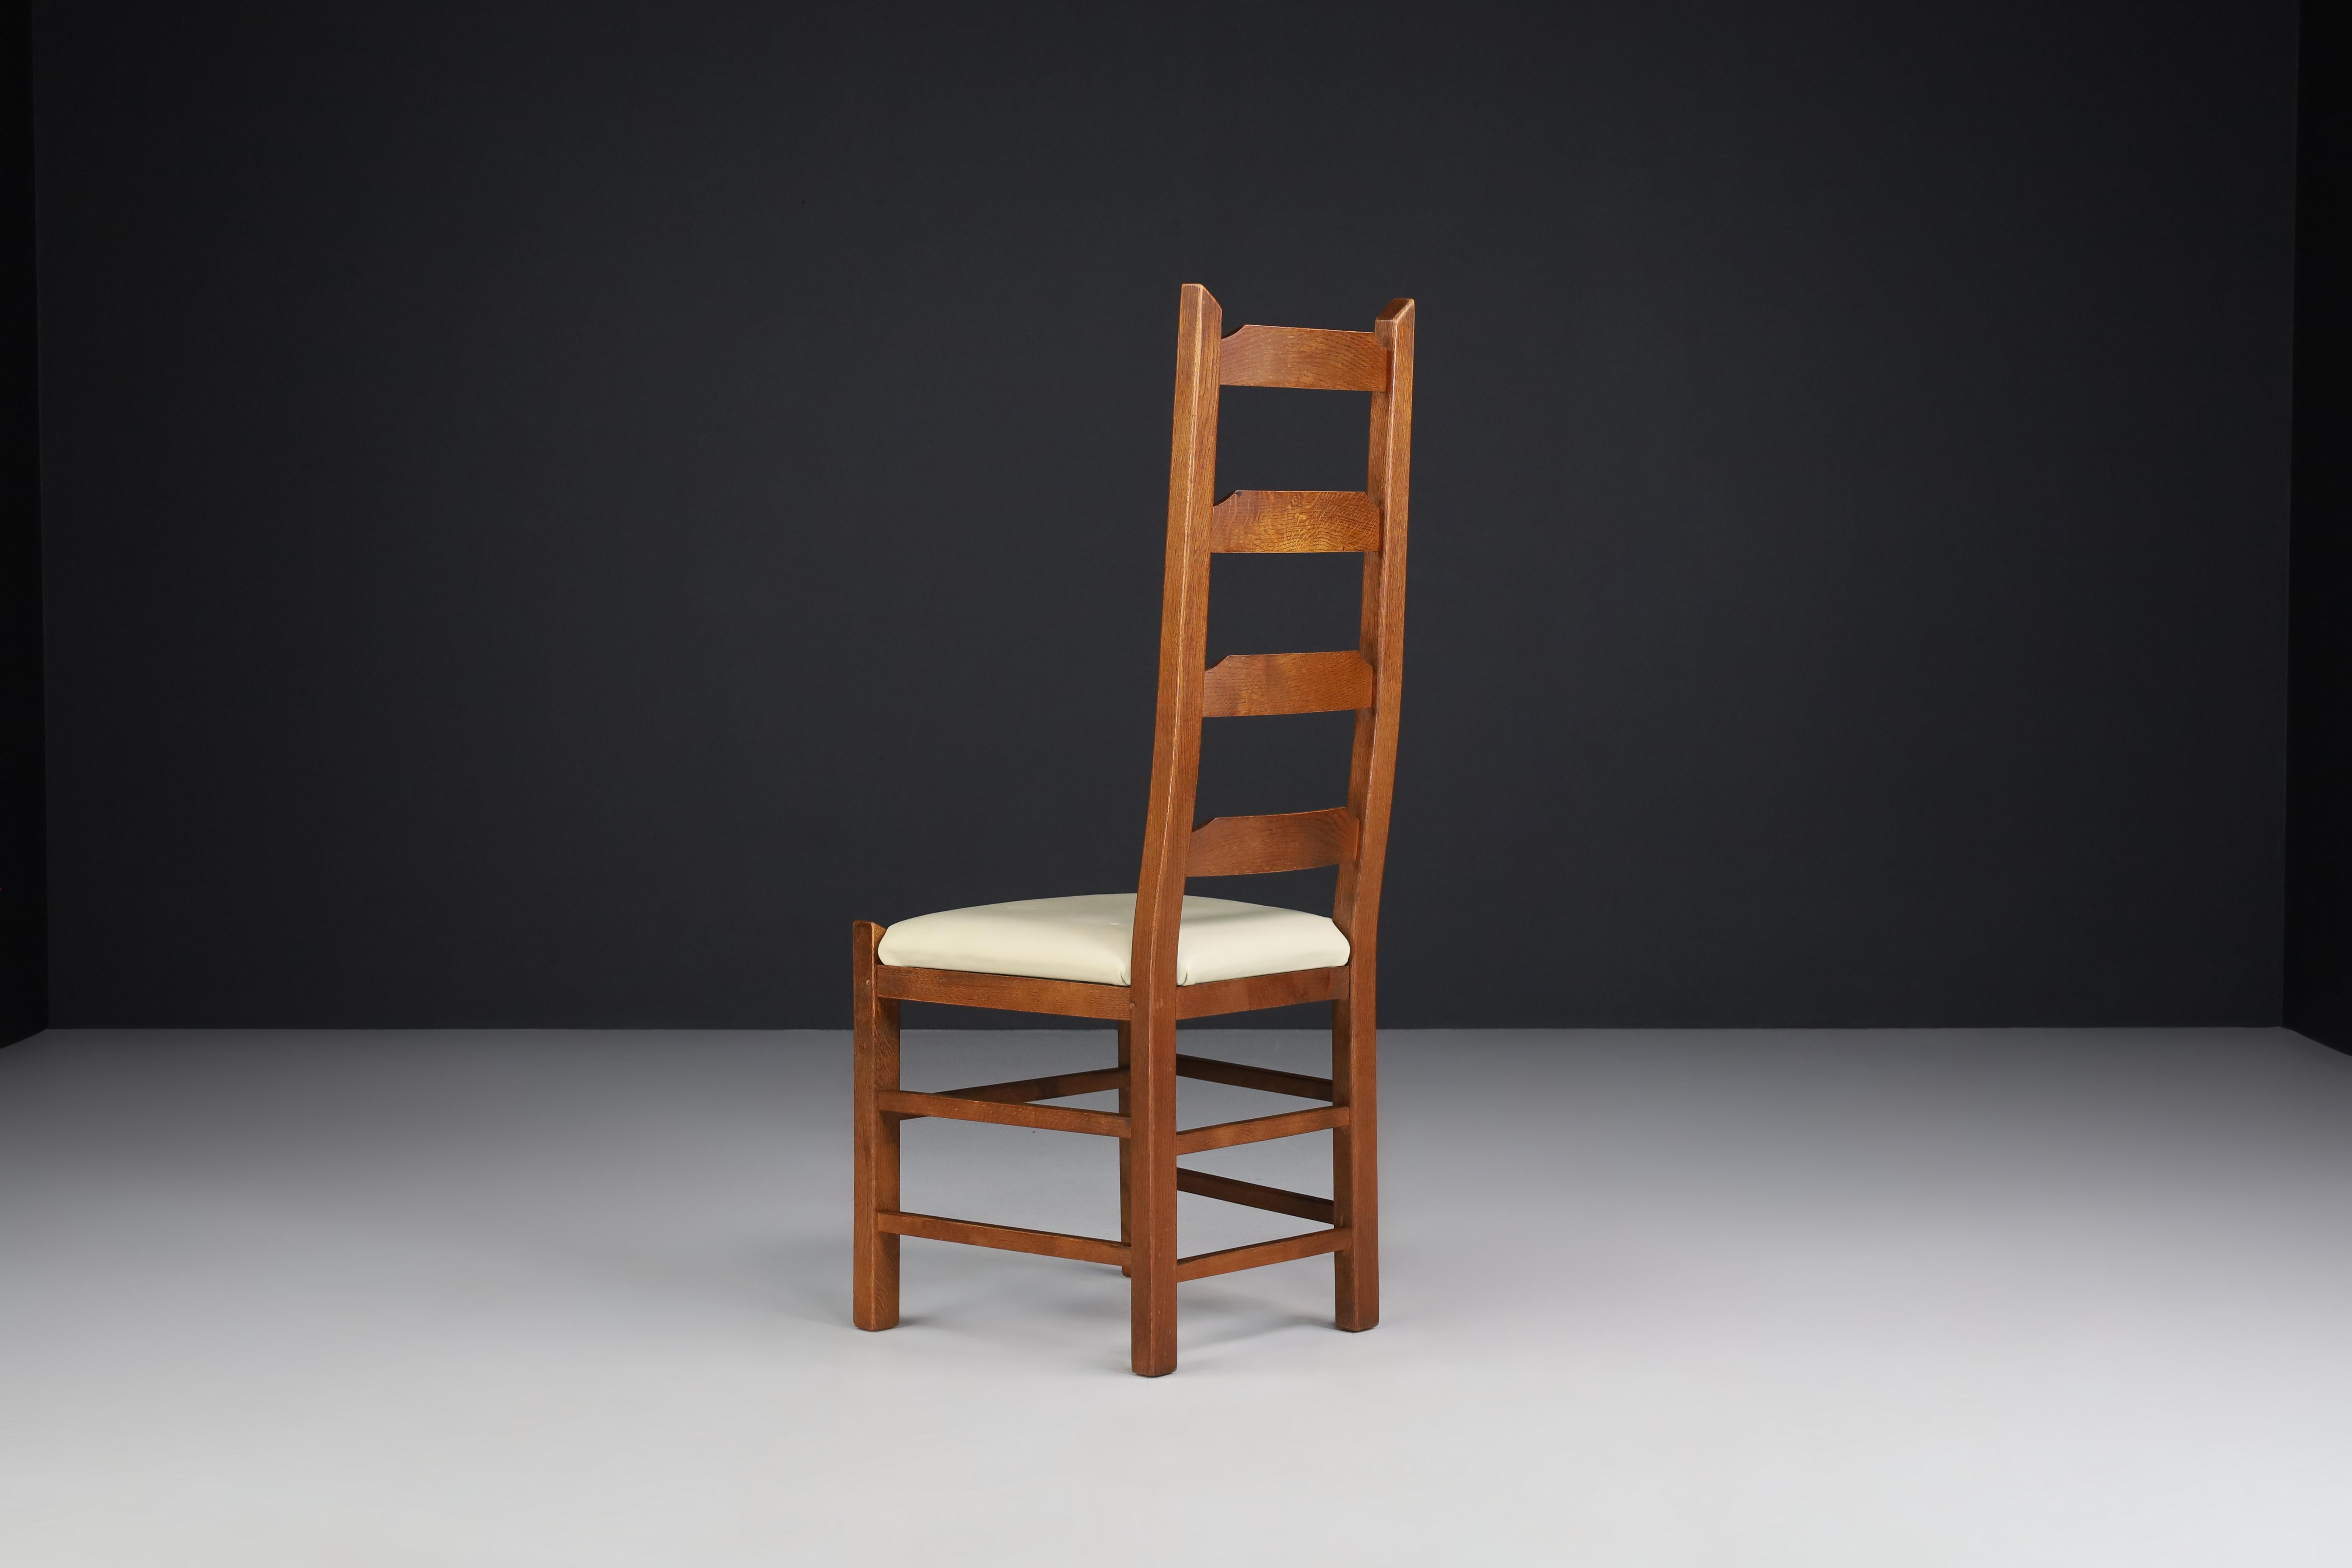 French Ladder Back Chairs Crafted in Oak and Leather Seats, France, 1950s For Sale